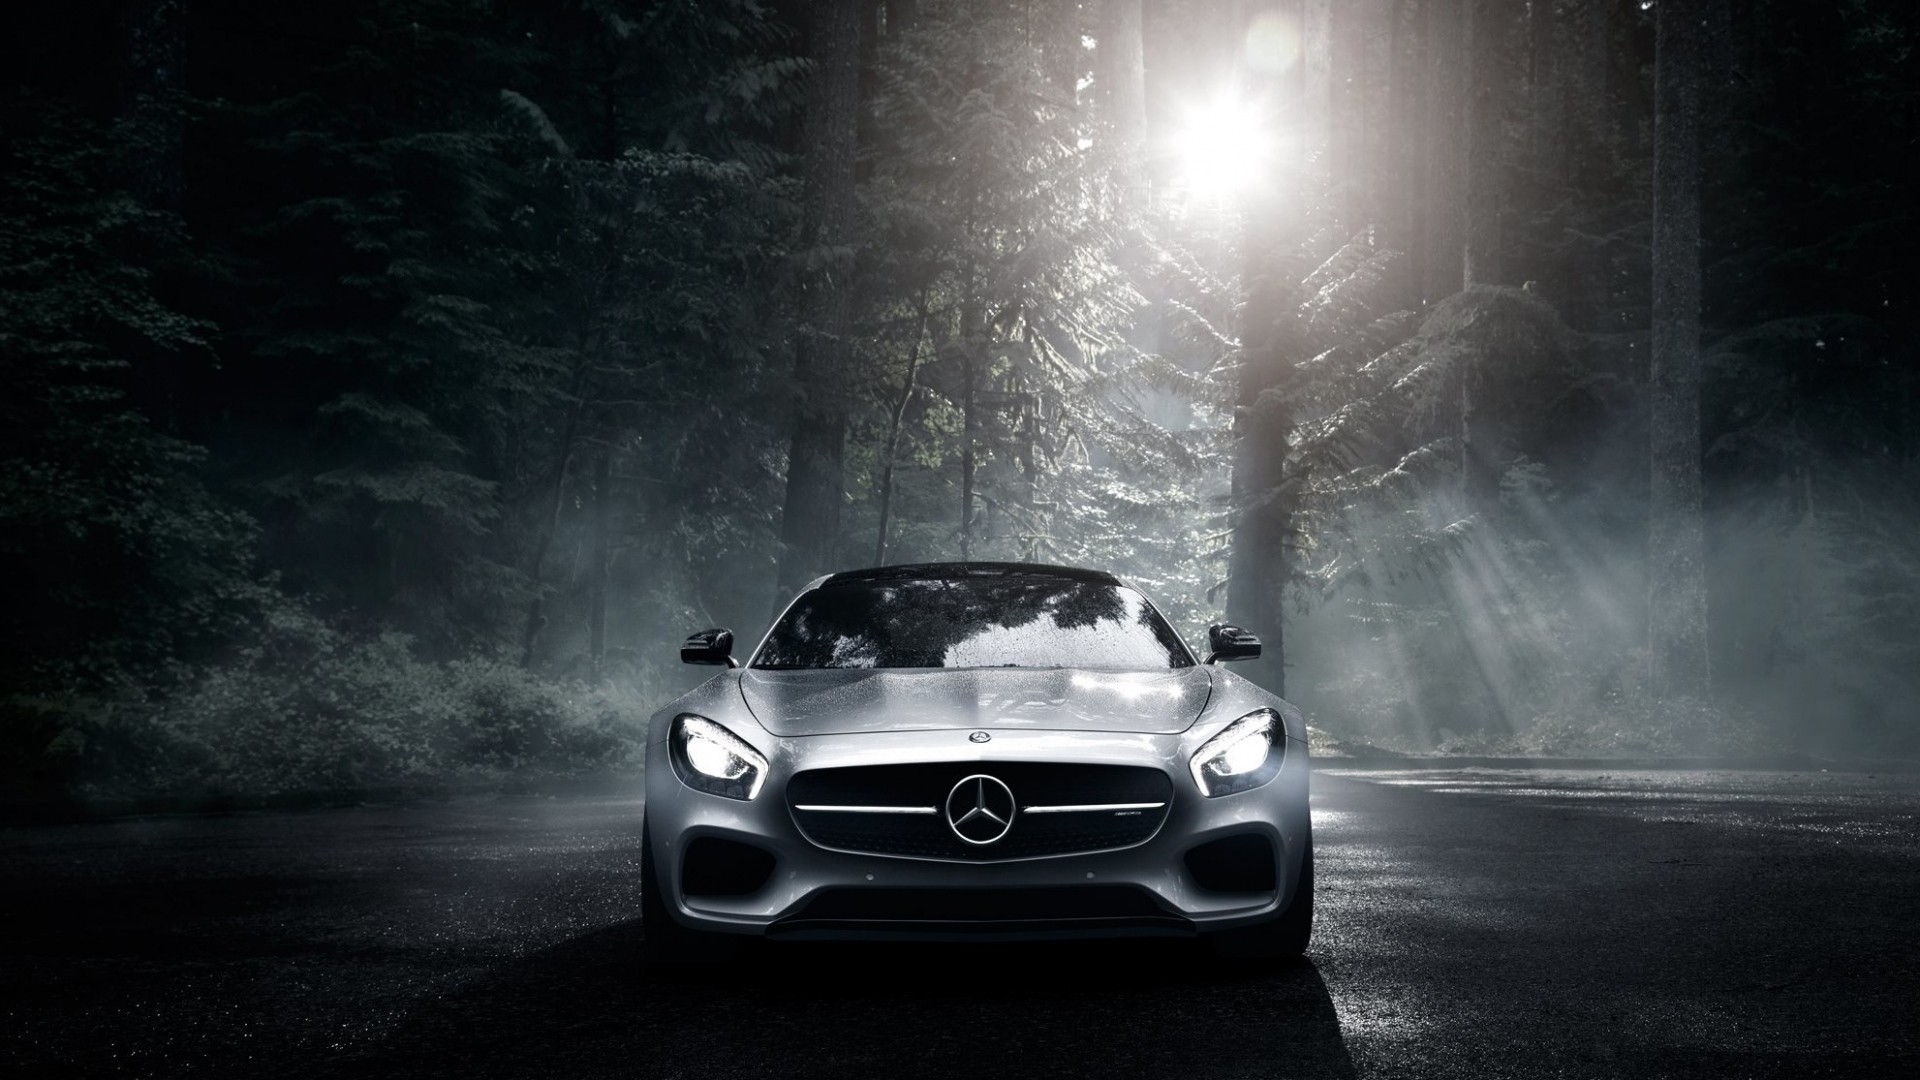 1920x1080 ... Background Full HD 1080p.  Wallpaper mercedes benz,  mercedes-amg, front view, silver, wood